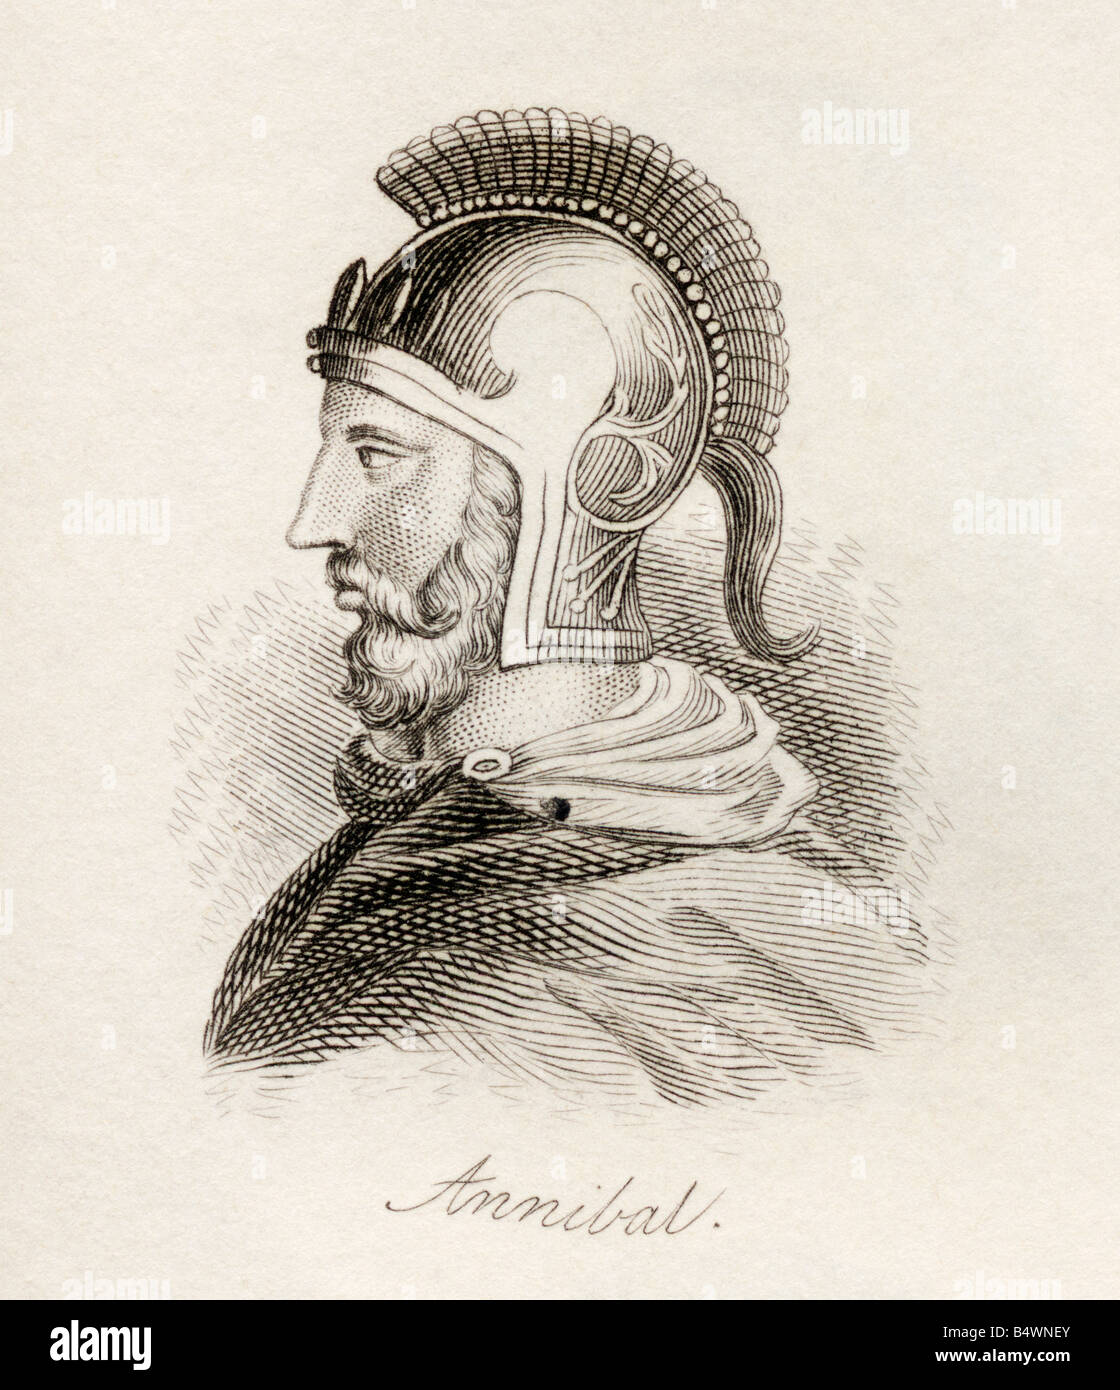 Hannibal The Great, 247 BC - c.183 BC. Carthaginian military commander and tactician. Stock Photo